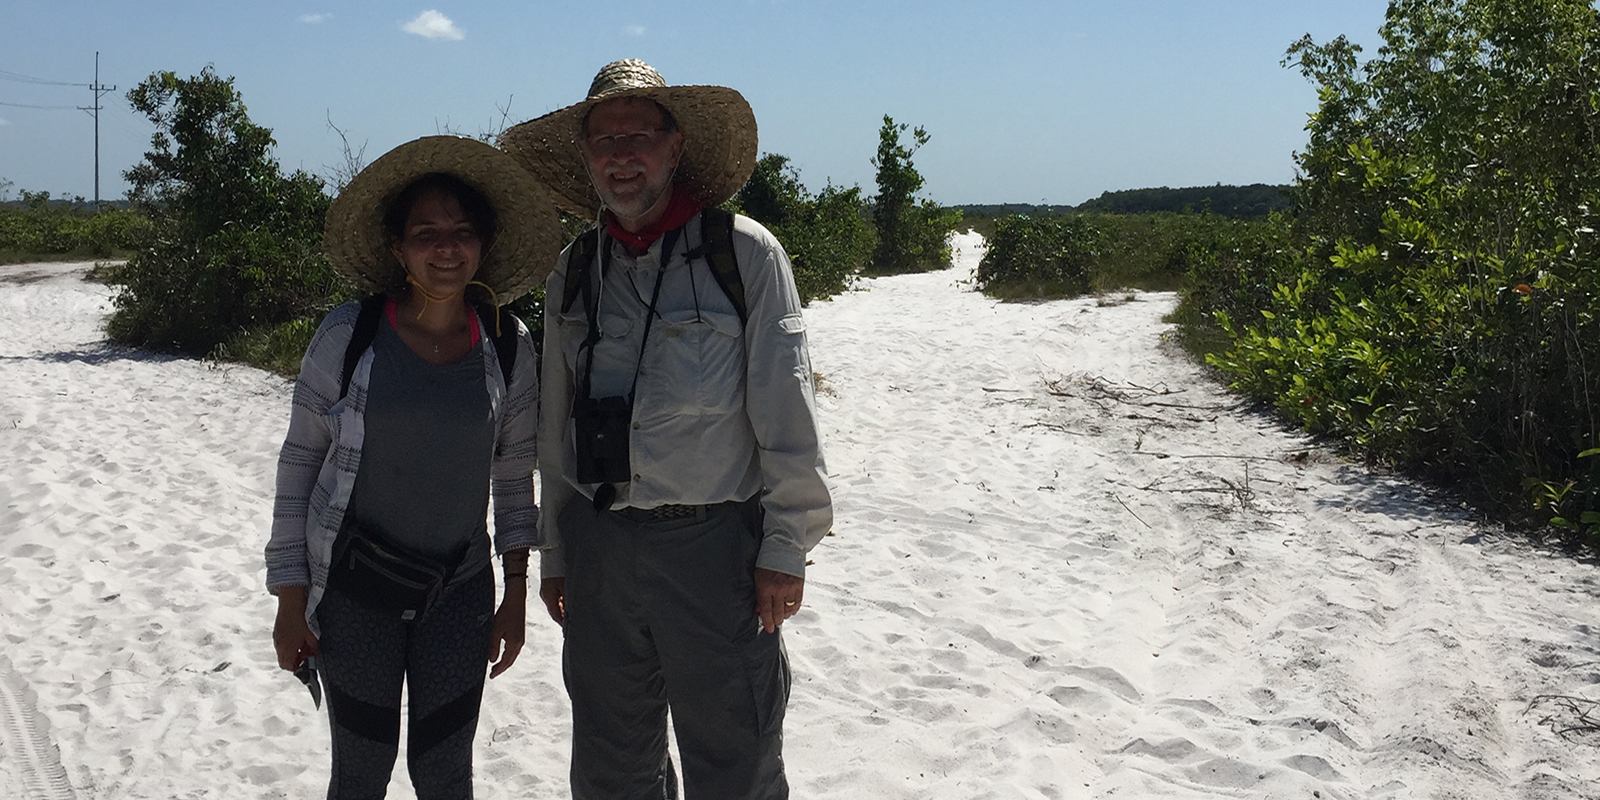 Two researchers posing outside surrounded by white sand that looks like snow